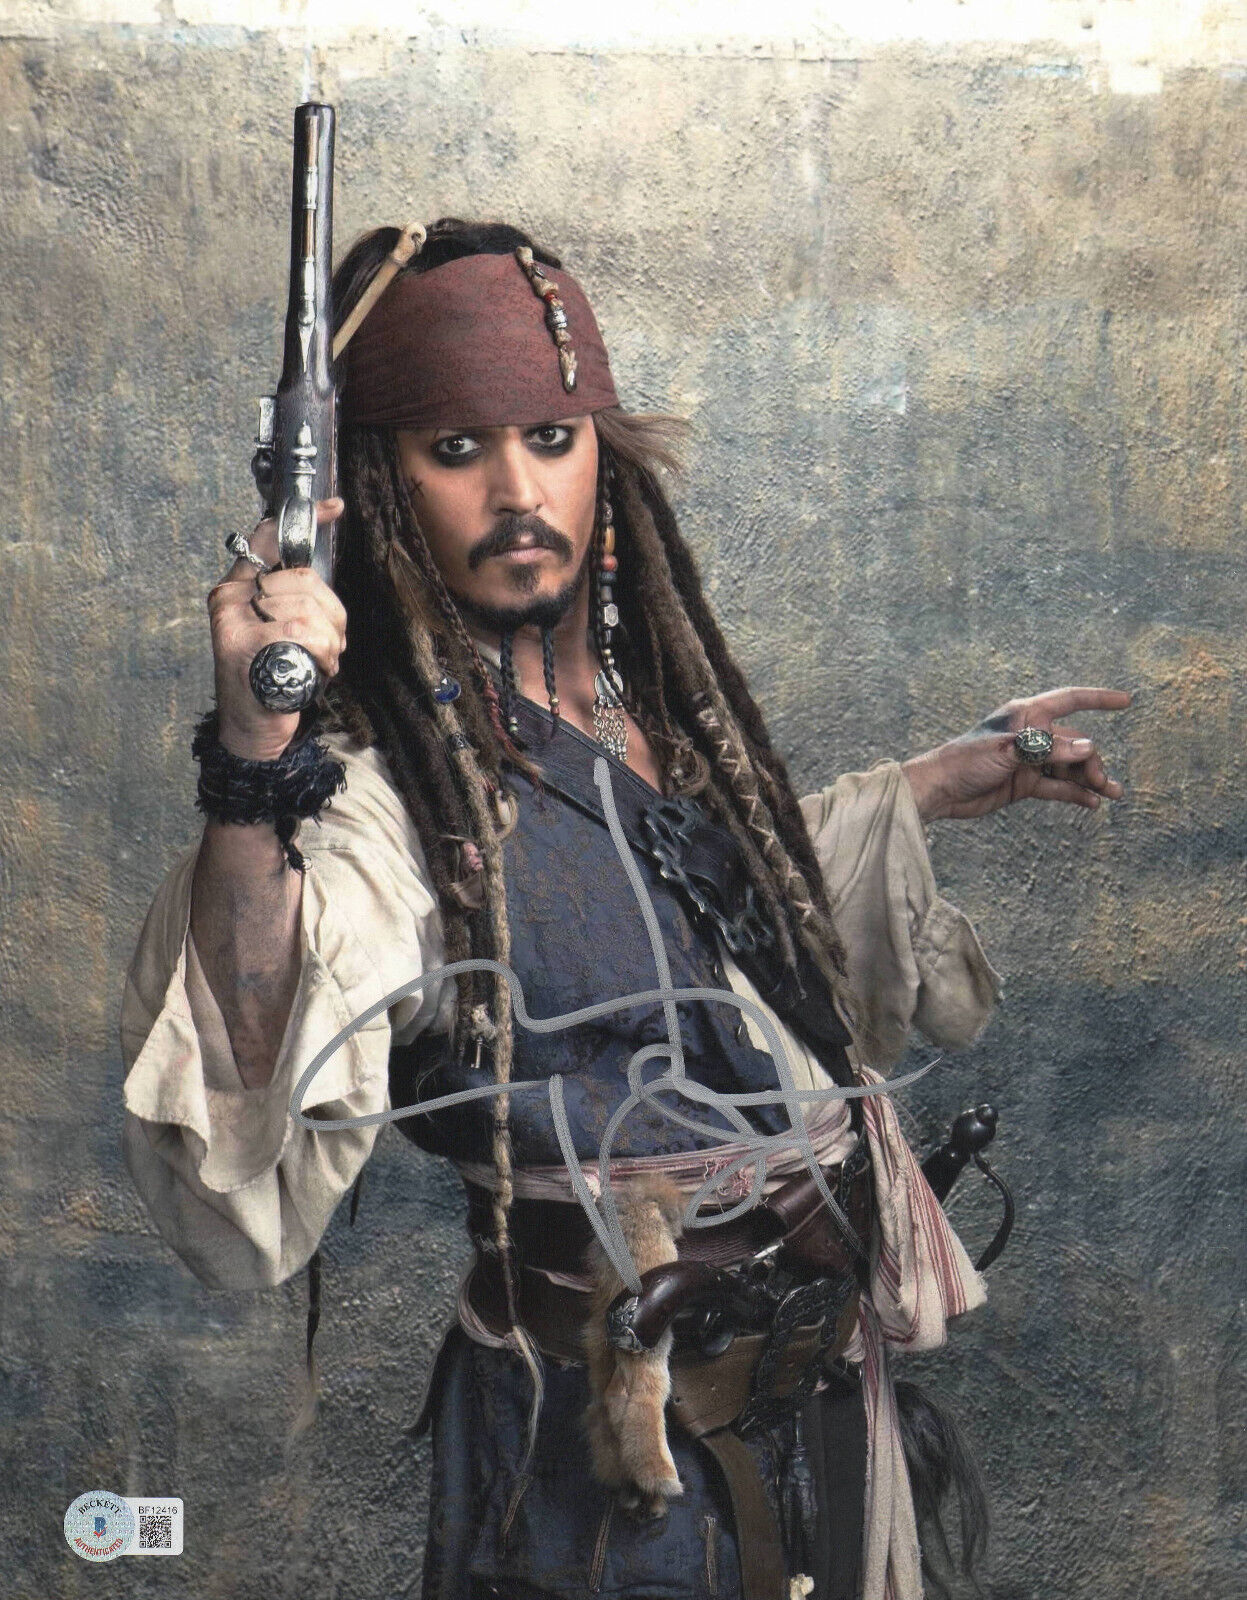 JOHNNY DEPP 'PIRATES OF THE CARIBBEAN' SIGNED AUTOGRAPH 11X14 PHOTO BECKETT BAS 